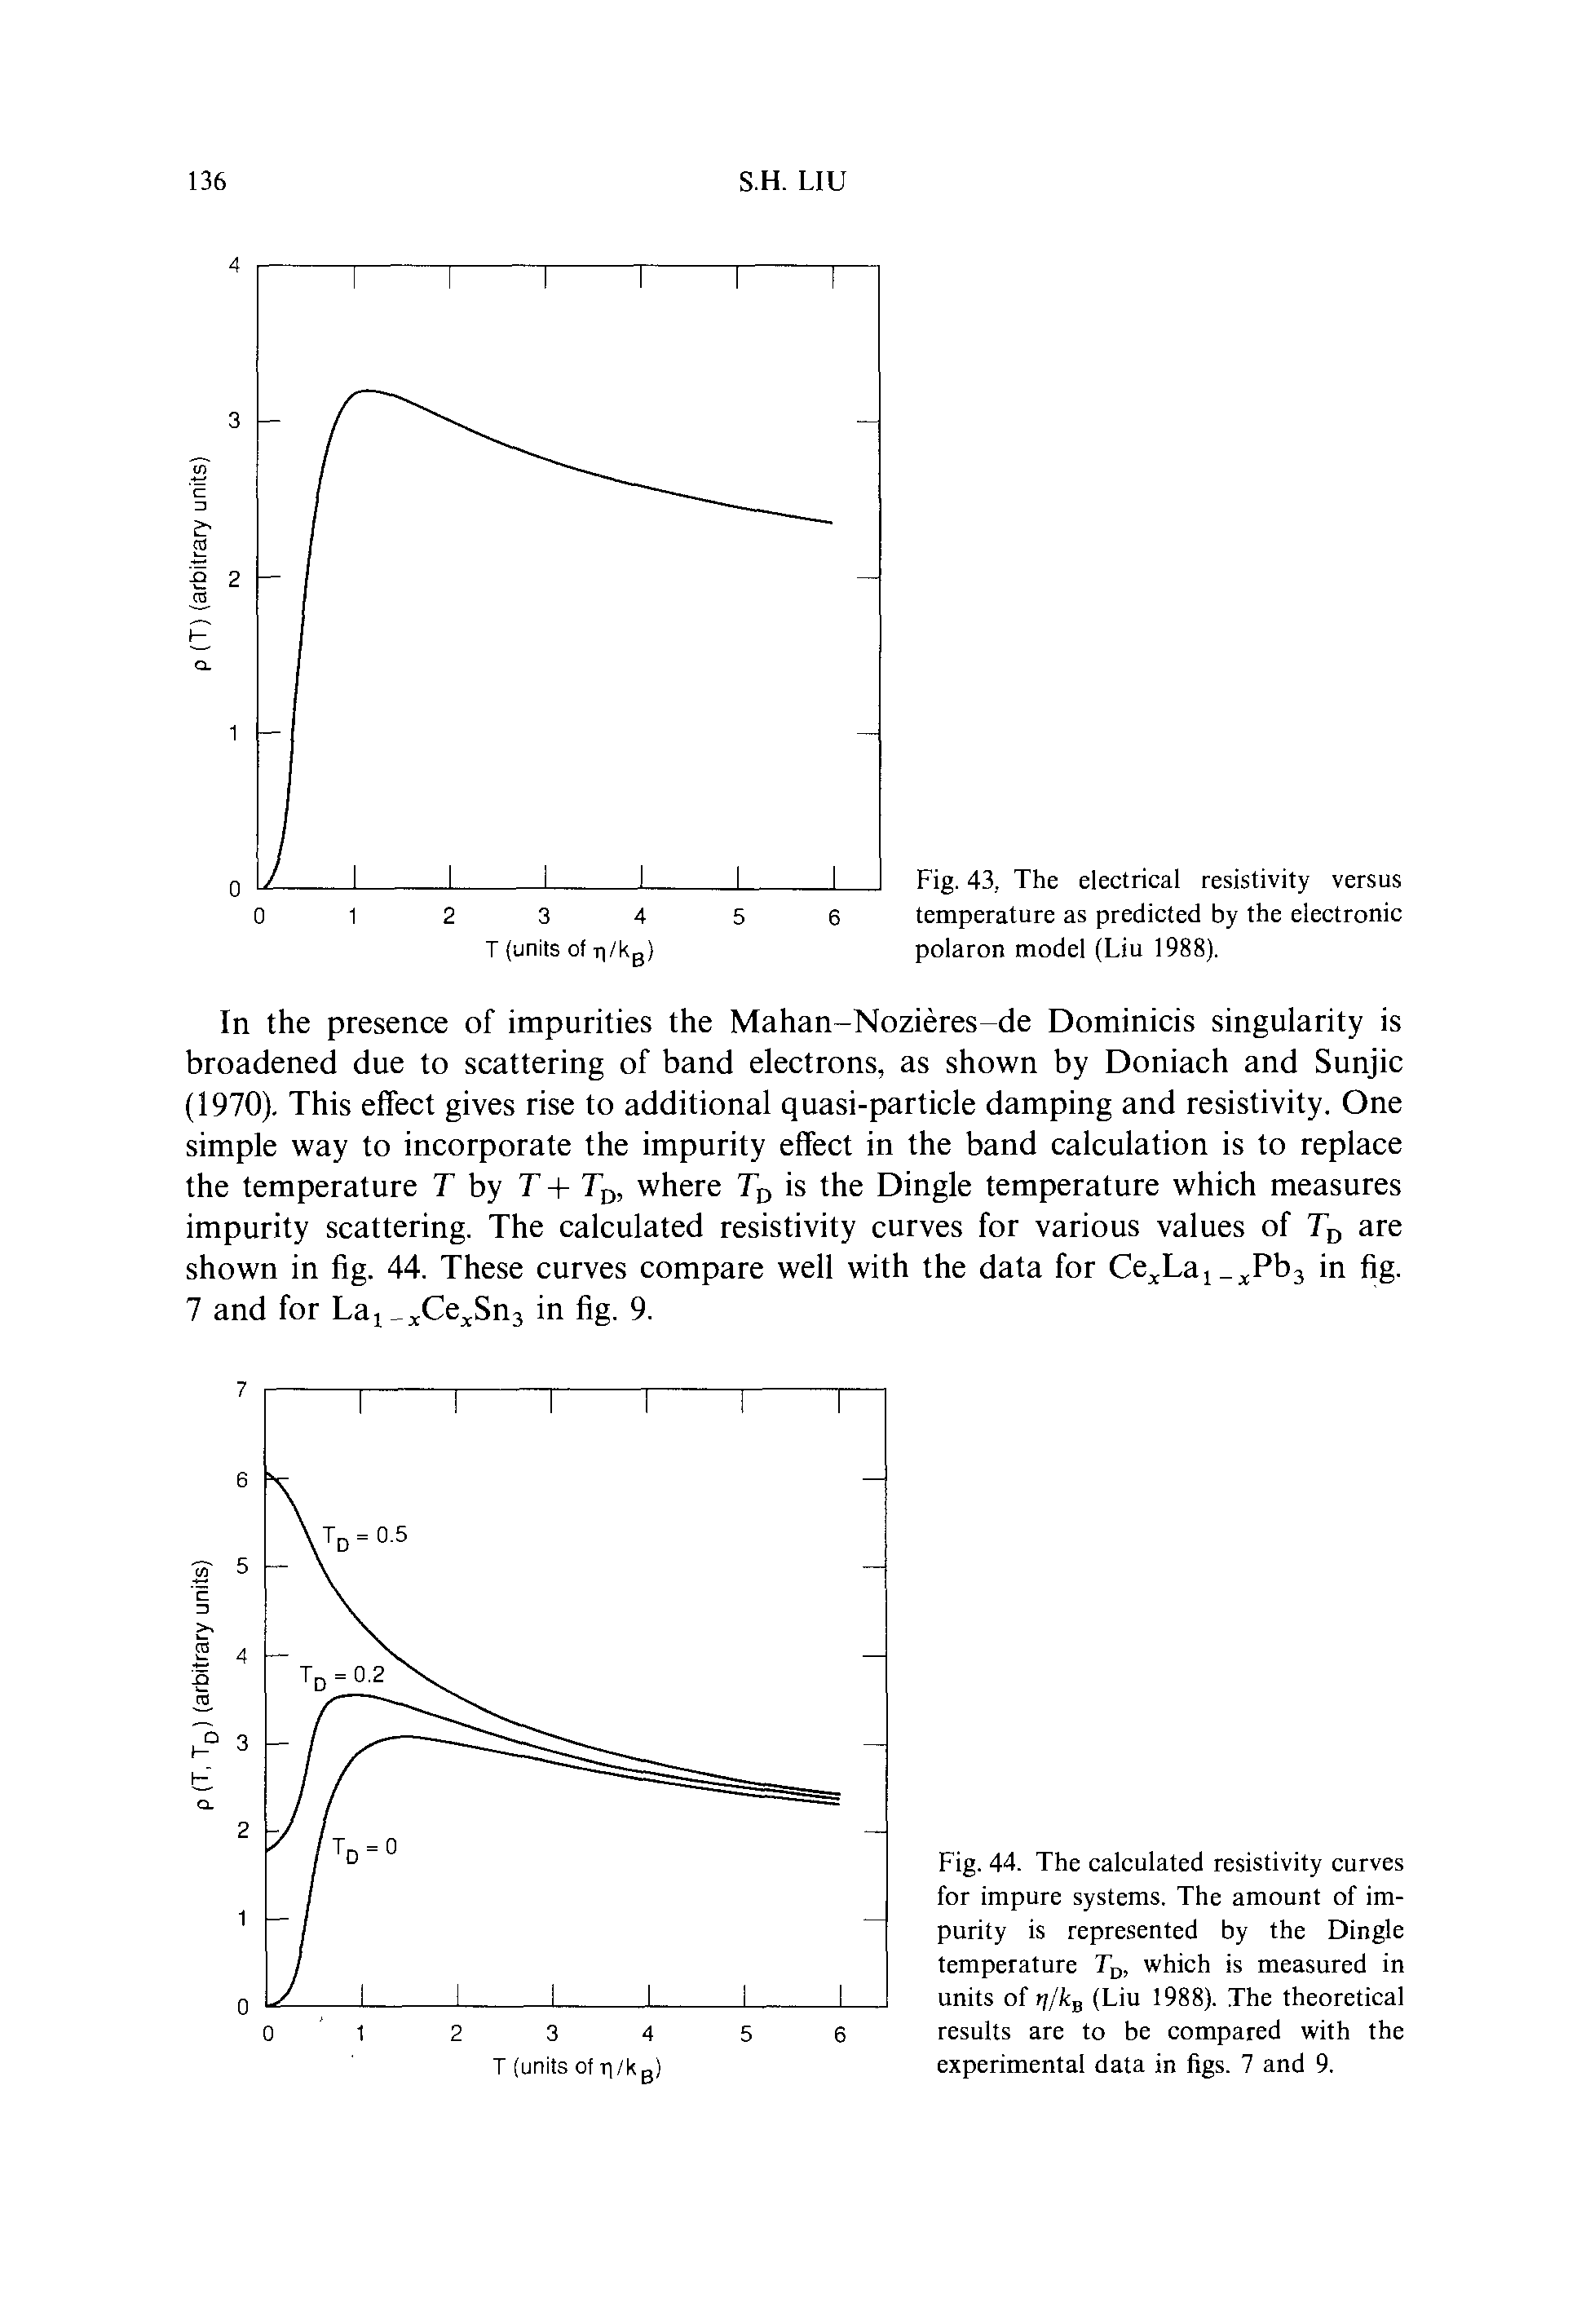 Fig. 44. The calculated resistivity curves for impure systems. The amount of impurity is represented by the Dingle temperature To, which is measured in units of ly/Icg (Liu 1988). The theoretical results are to be compared with the experimental data in figs. 7 and 9.